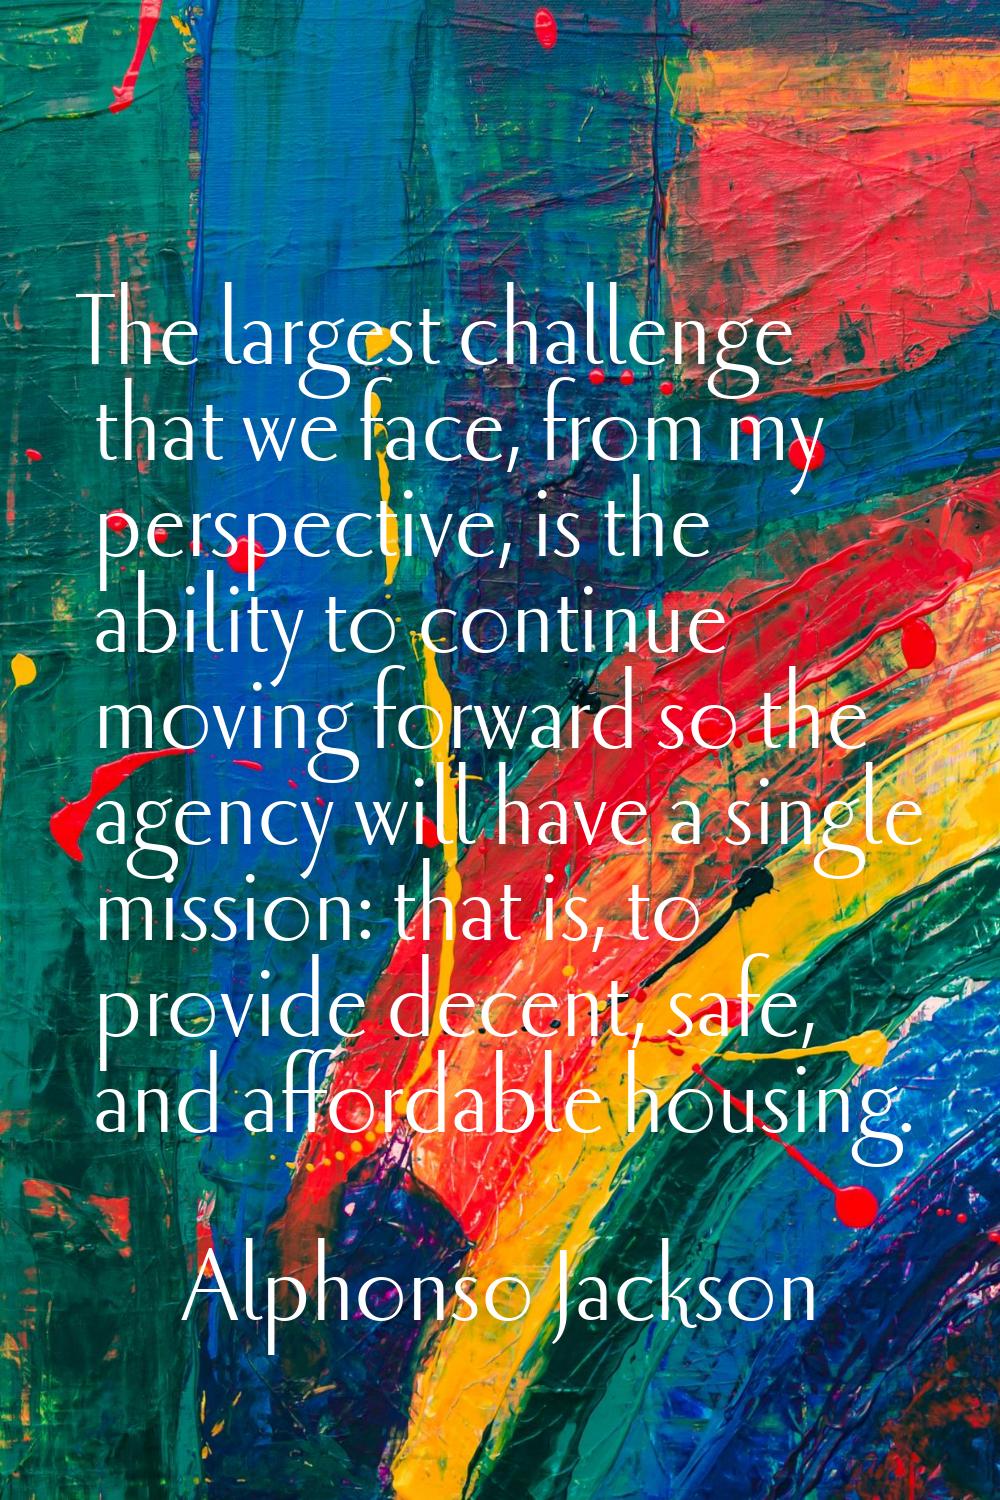 The largest challenge that we face, from my perspective, is the ability to continue moving forward 